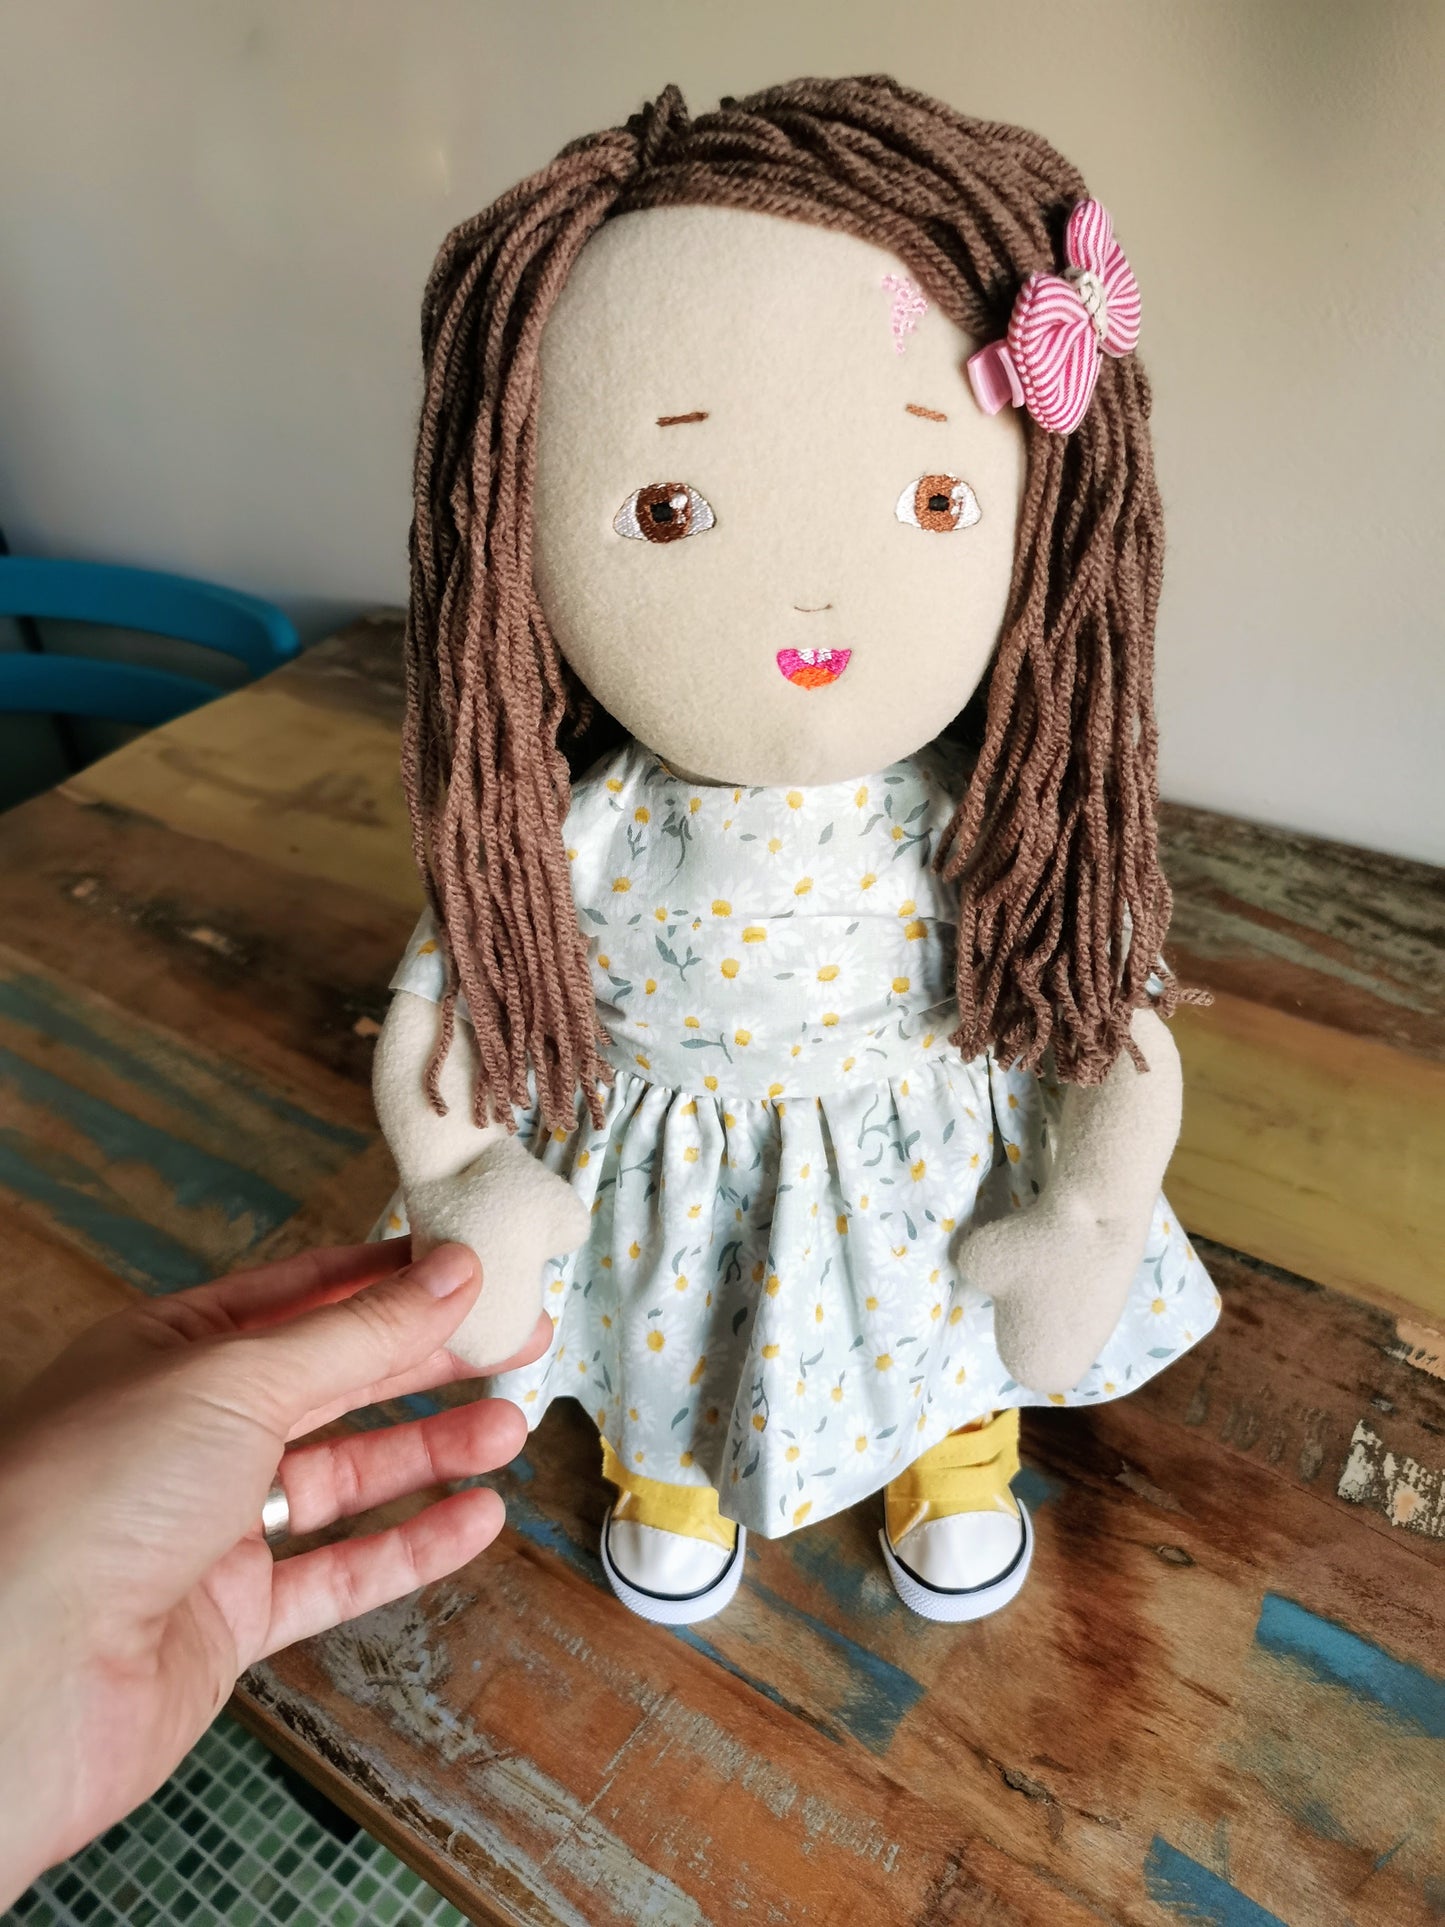 Replica Doll of real people, plush doll from photos, Mini-me doll, personalized plush doll with custom outfit, portrait doll 50 cm